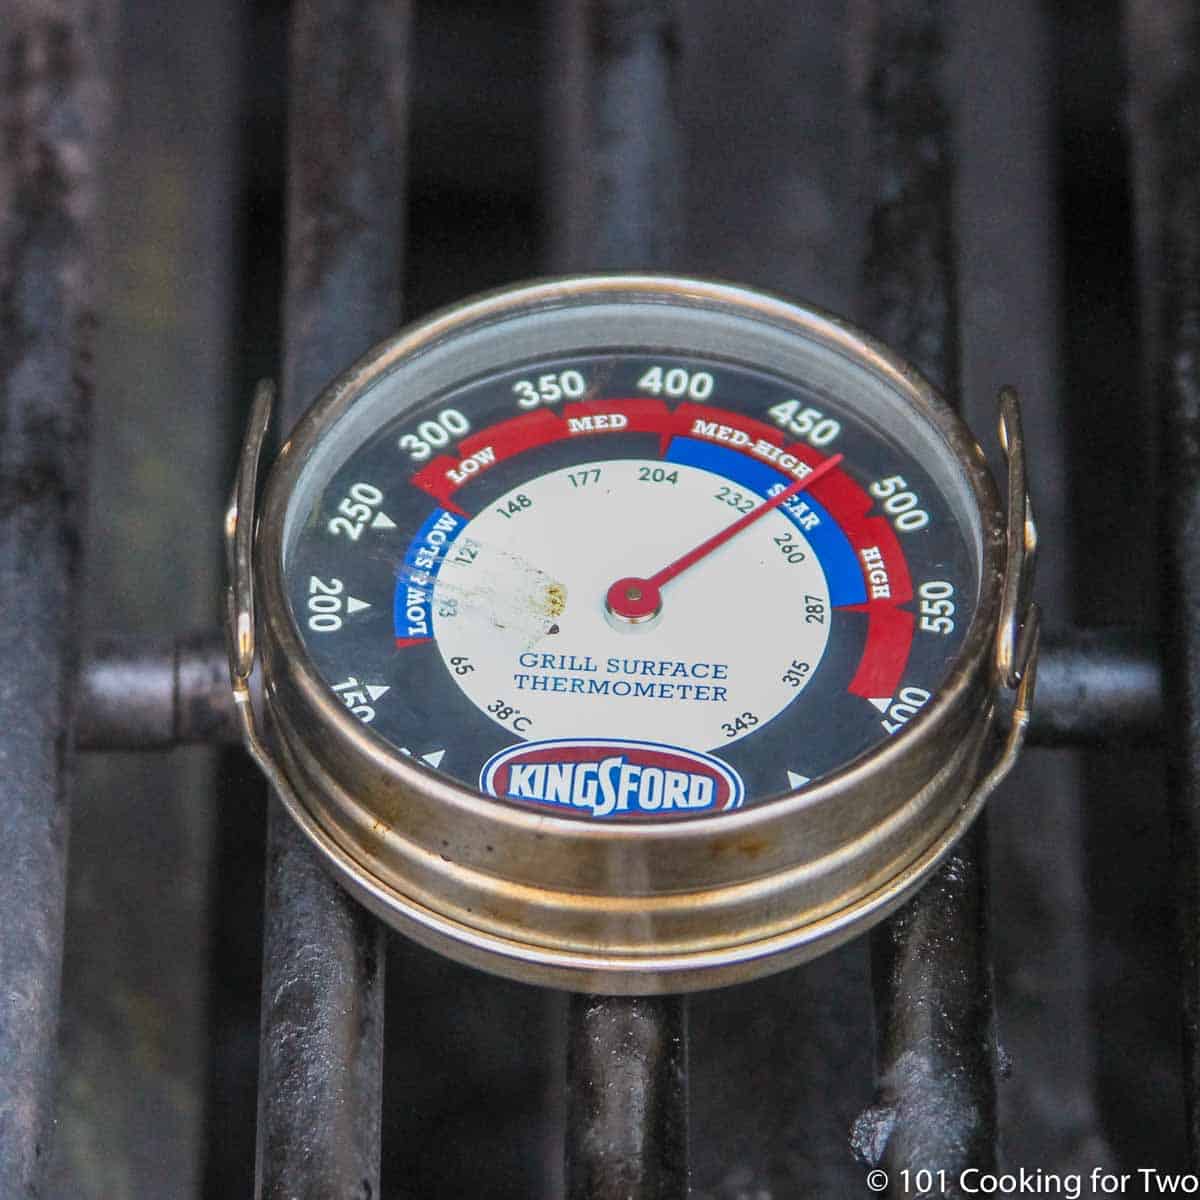 https://www.101cookingfortwo.com/wp-content/uploads/2021/05/grill-surface-thermometer-sq.jpg